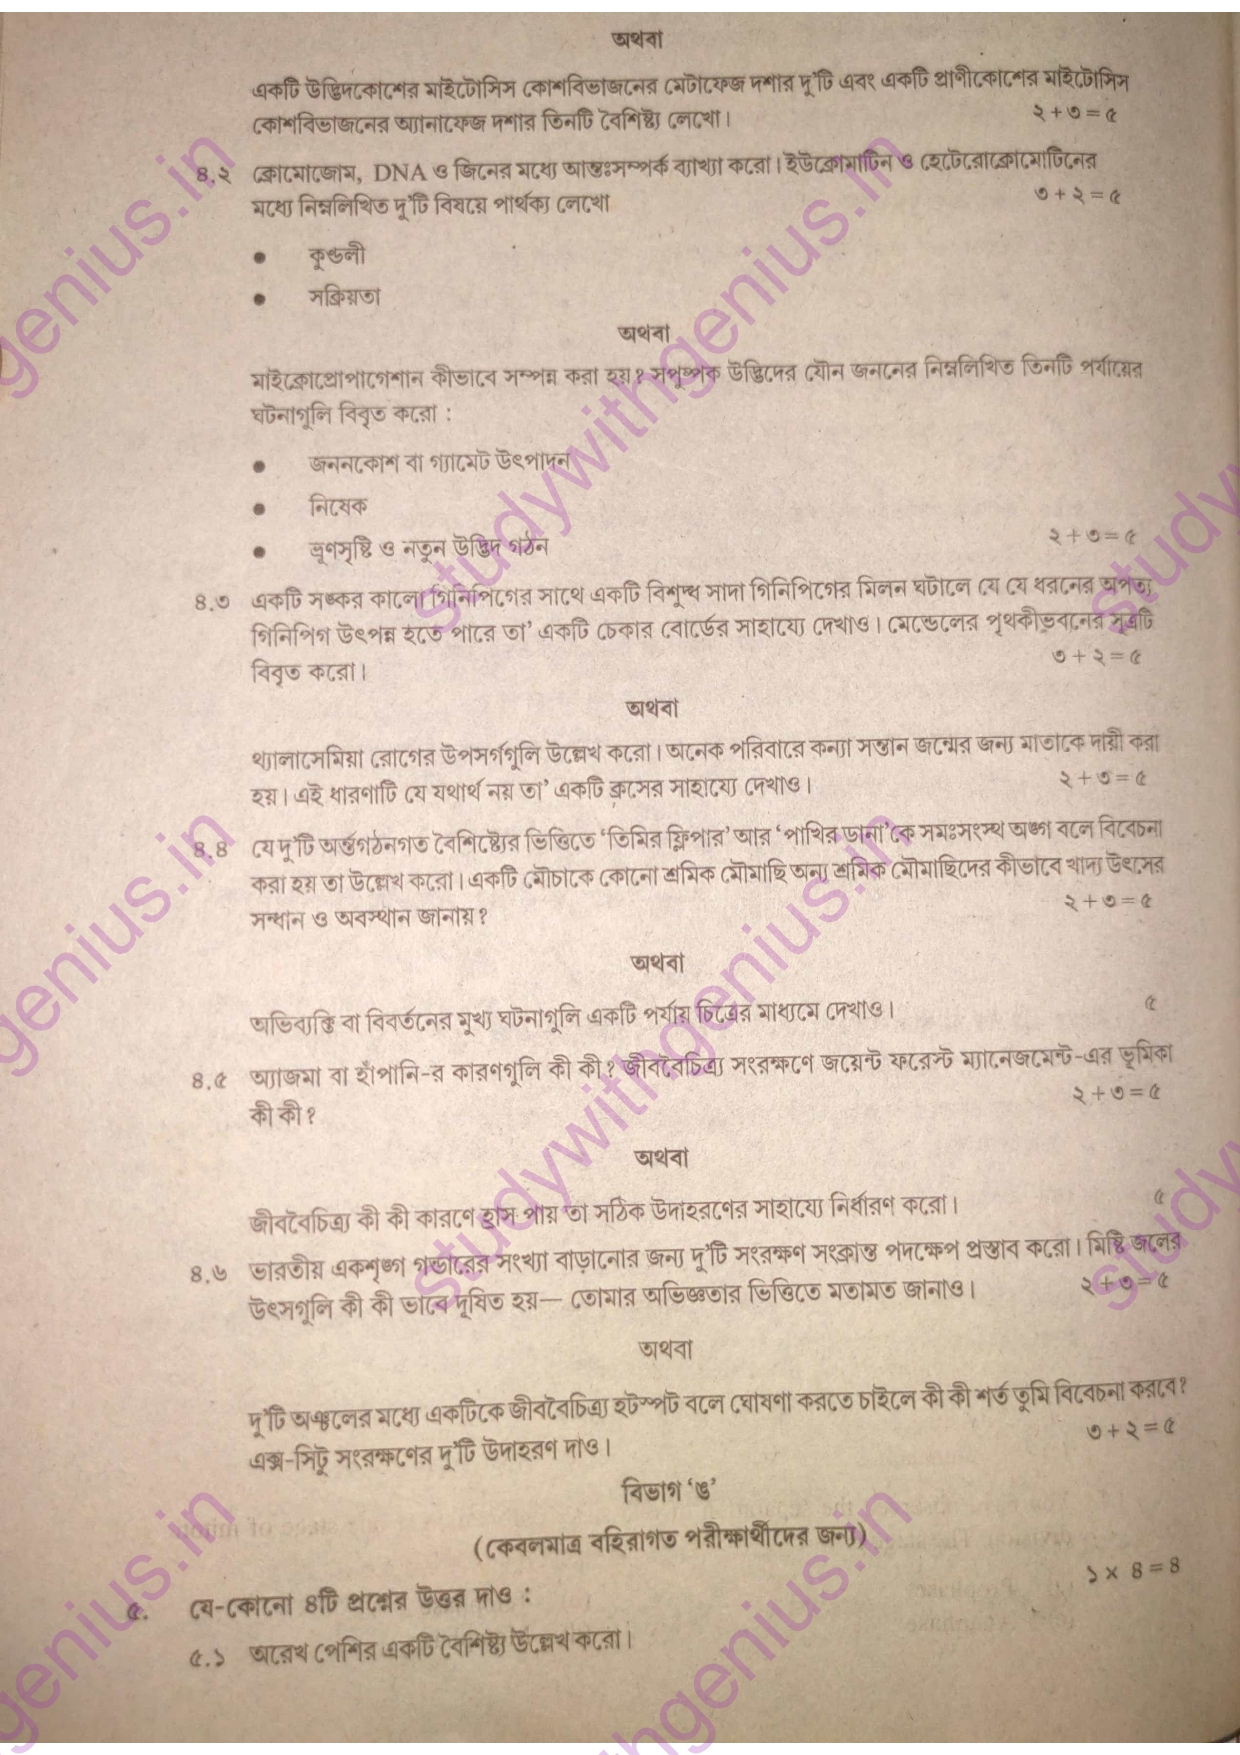 WBBSE Madhyamik Life Science Subject Question Papers Bengali Medium 2017